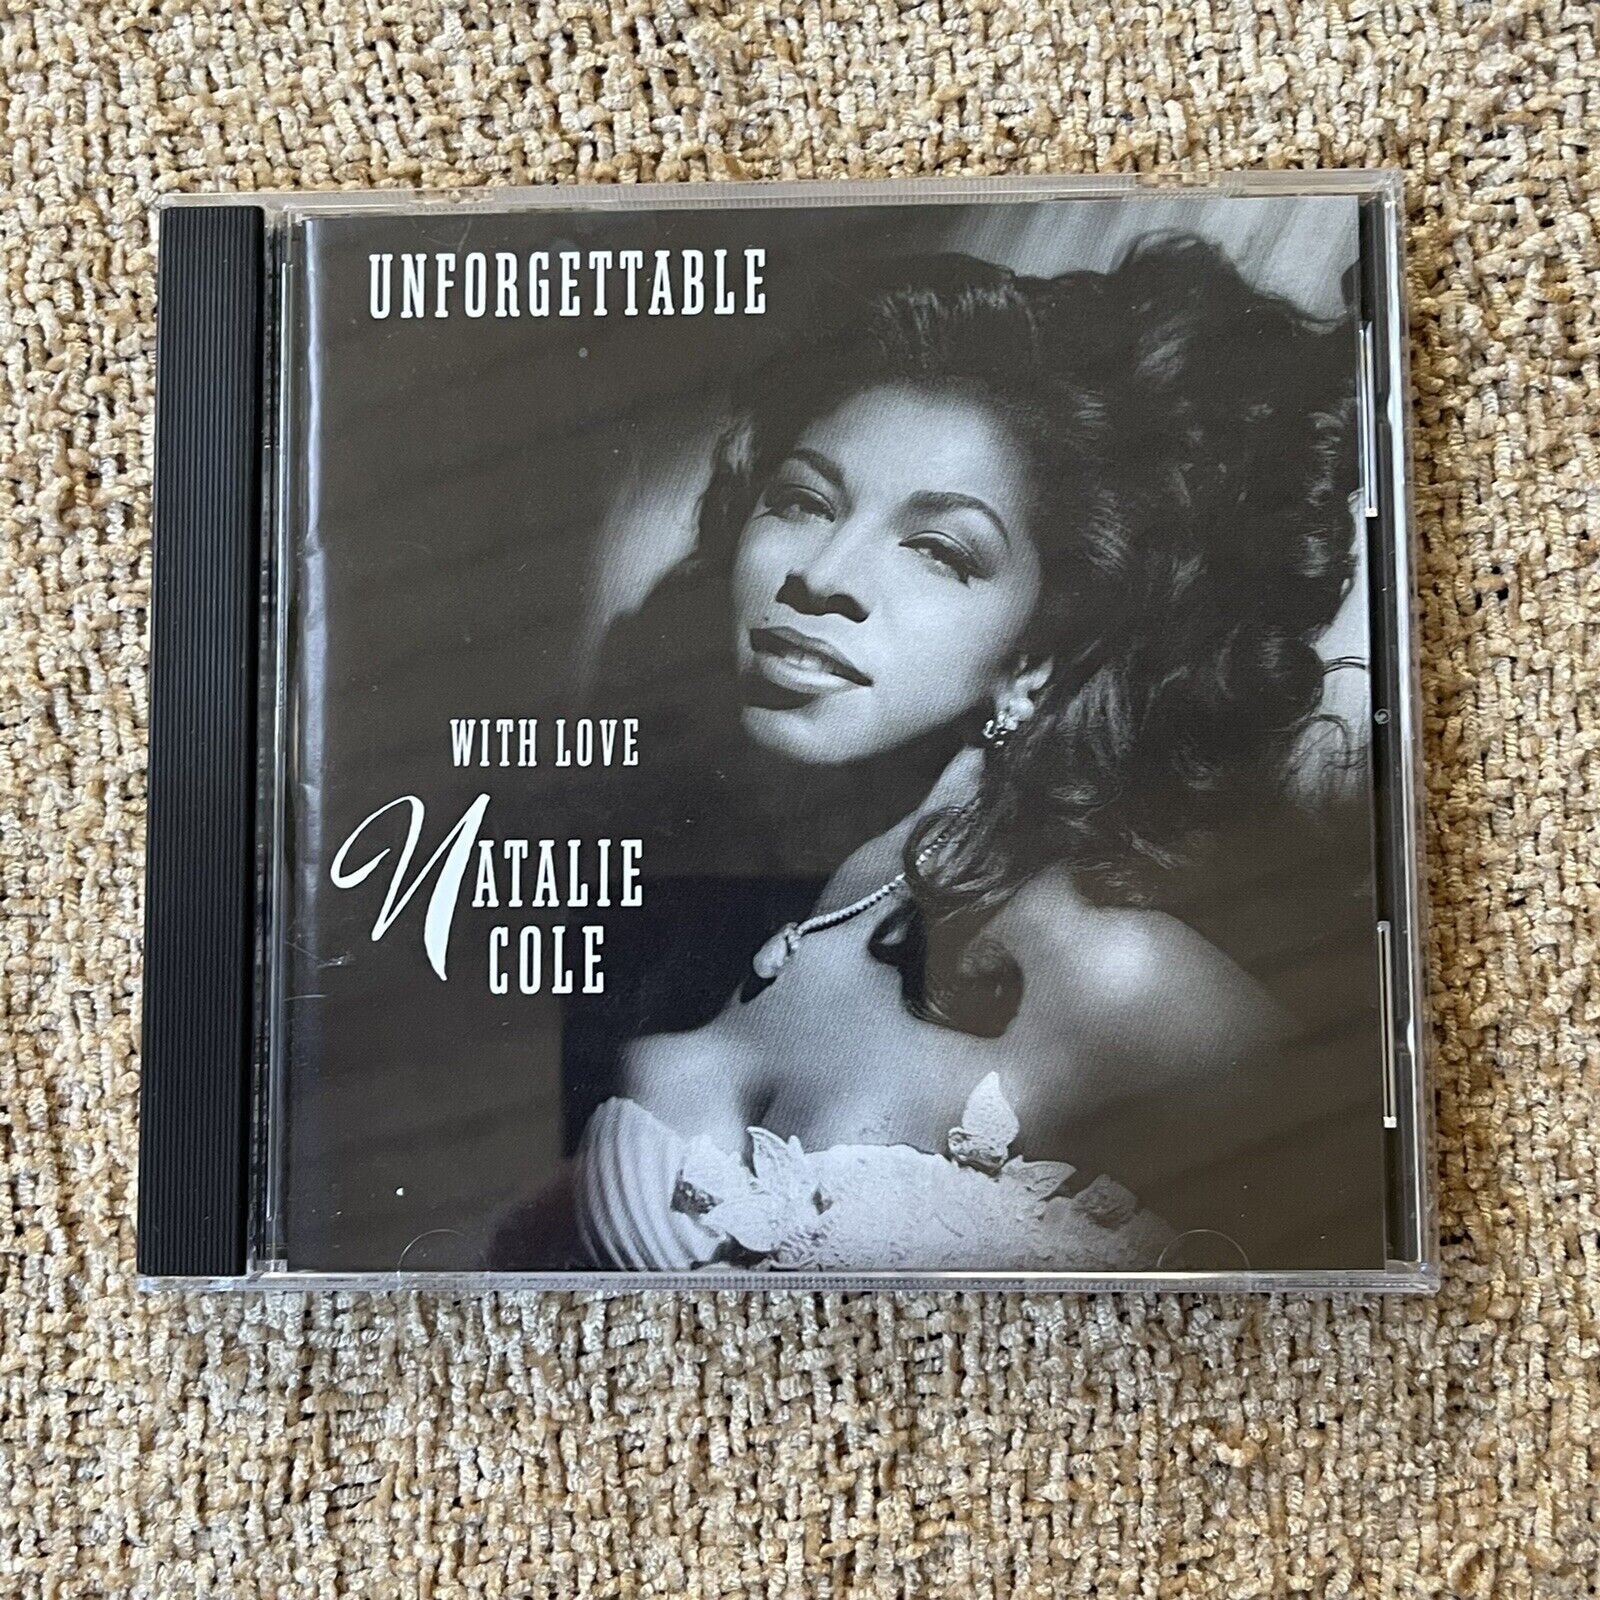 Unforgettable: With Love, By Natalie Cole, CD Vintage 1991, Elektra